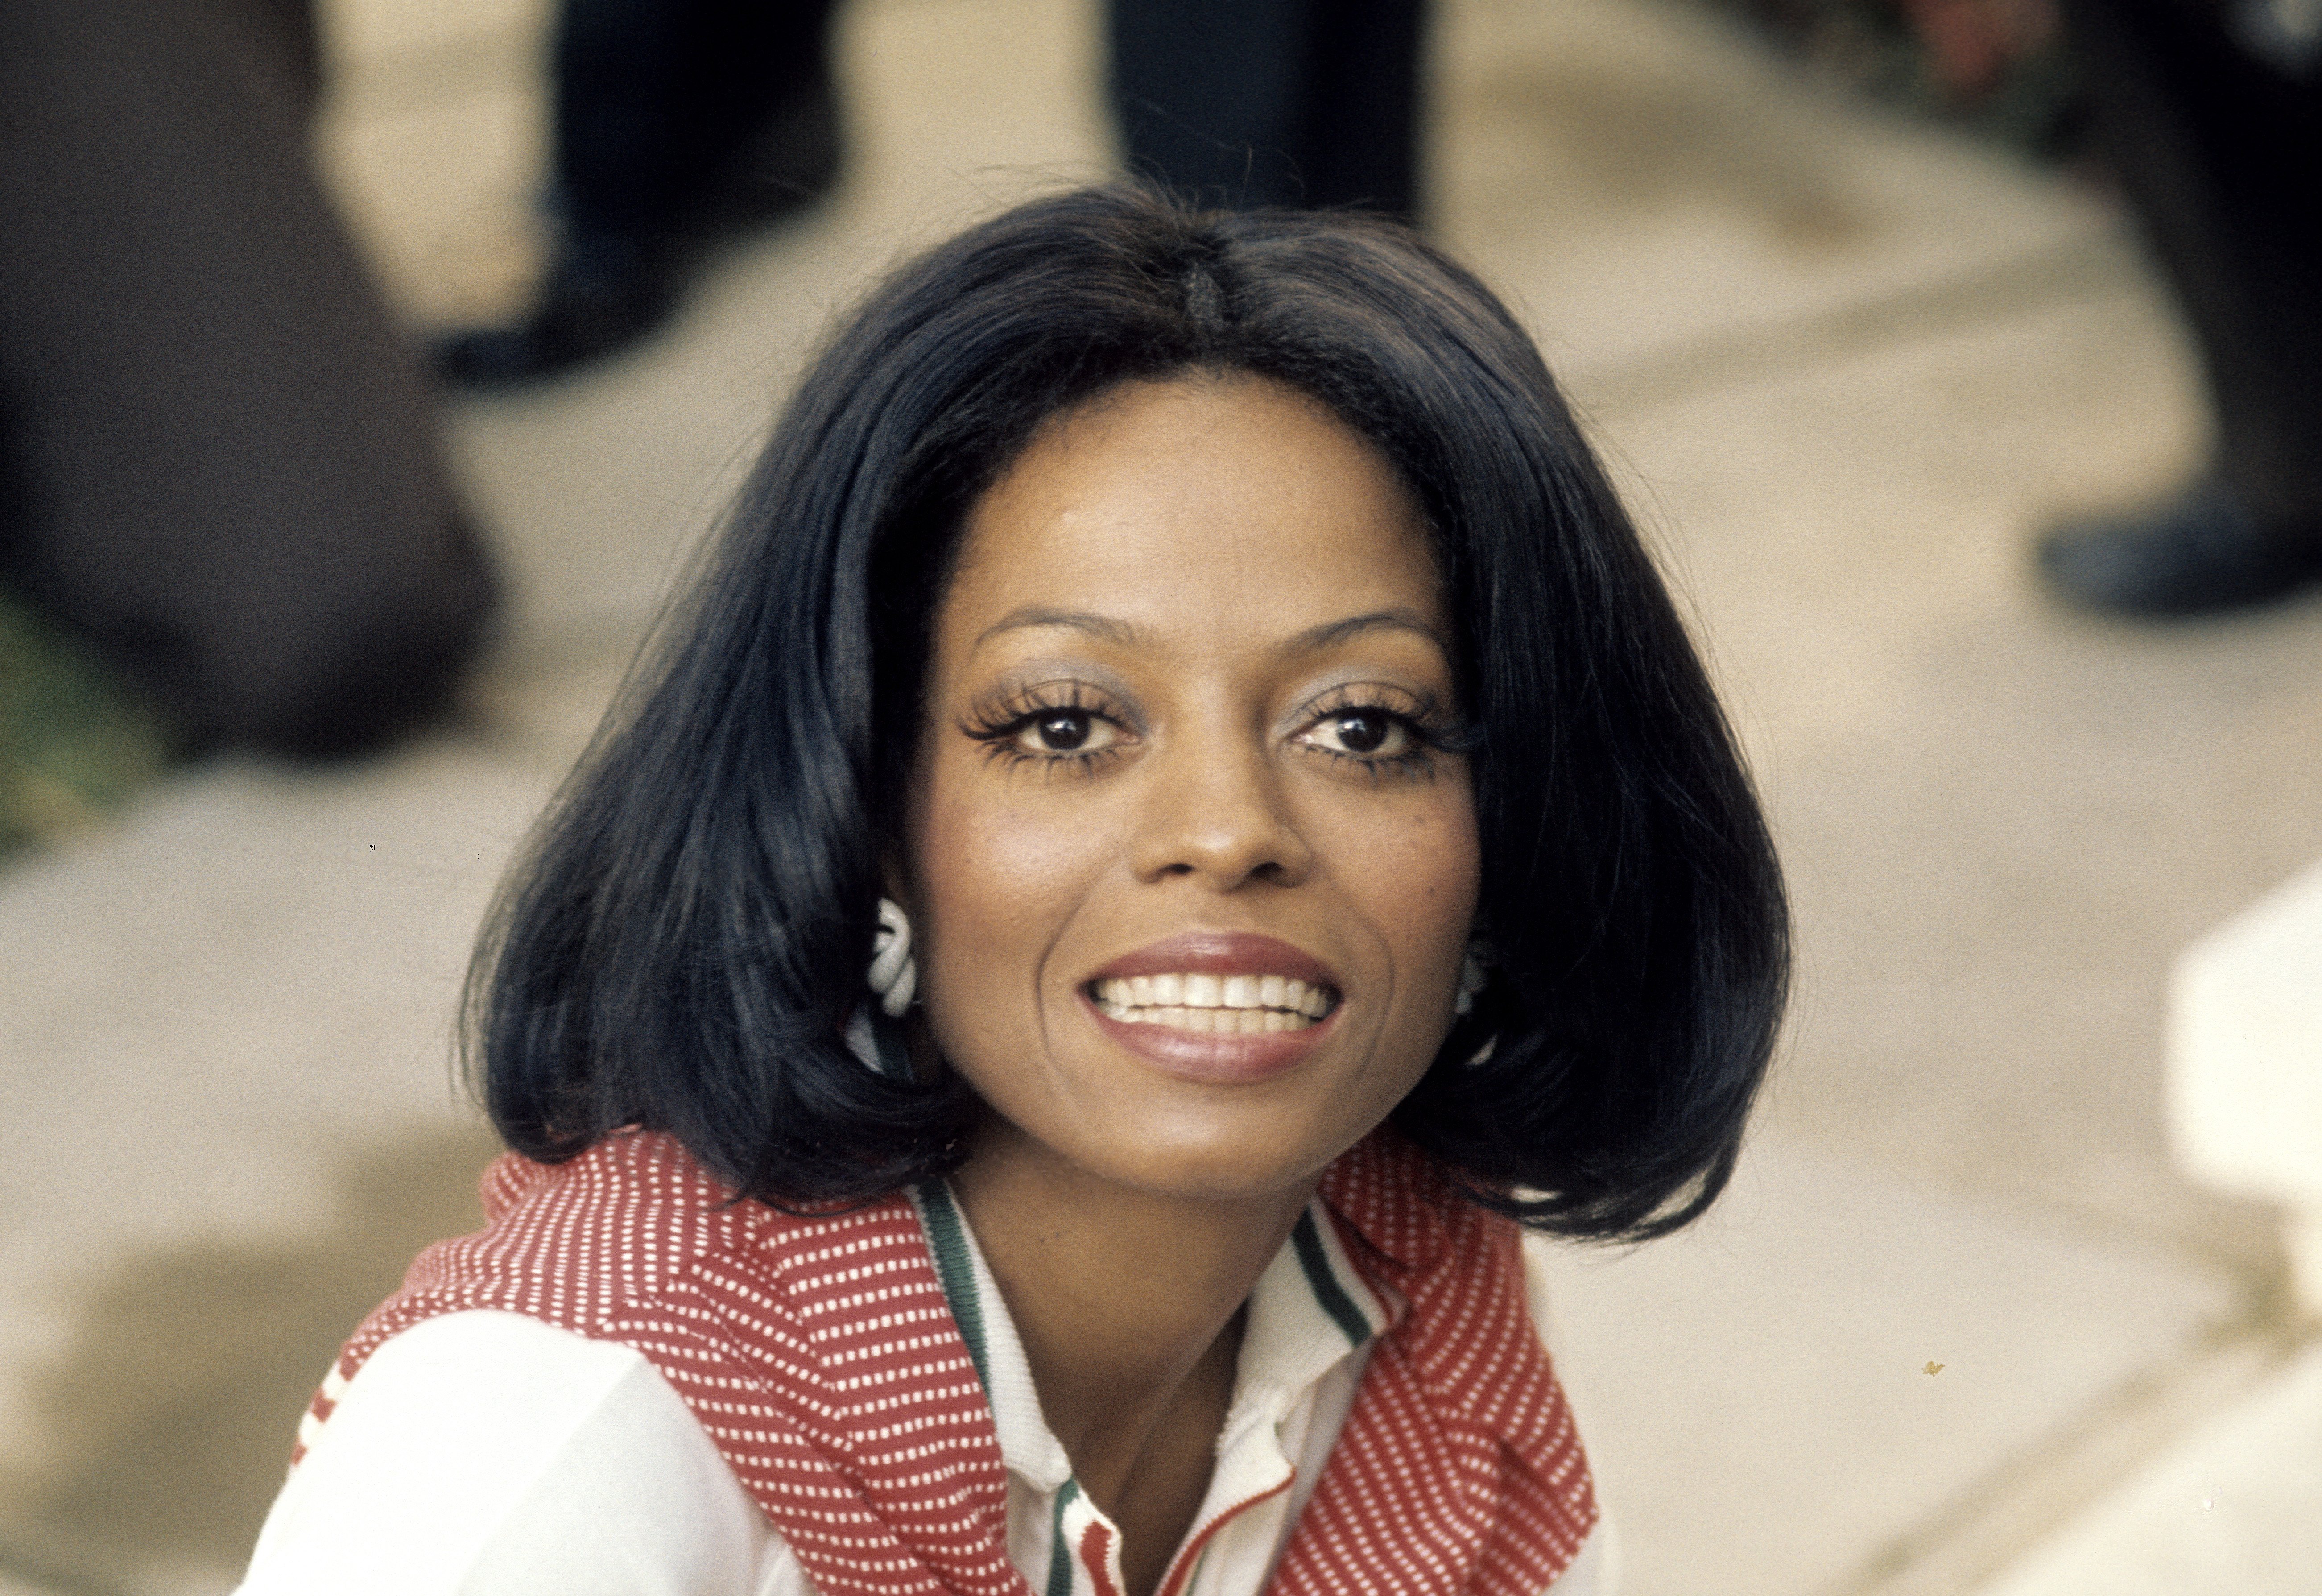 Singer Diana Ross visits London to promote her new album in September 1973. | Photo: GettyImages